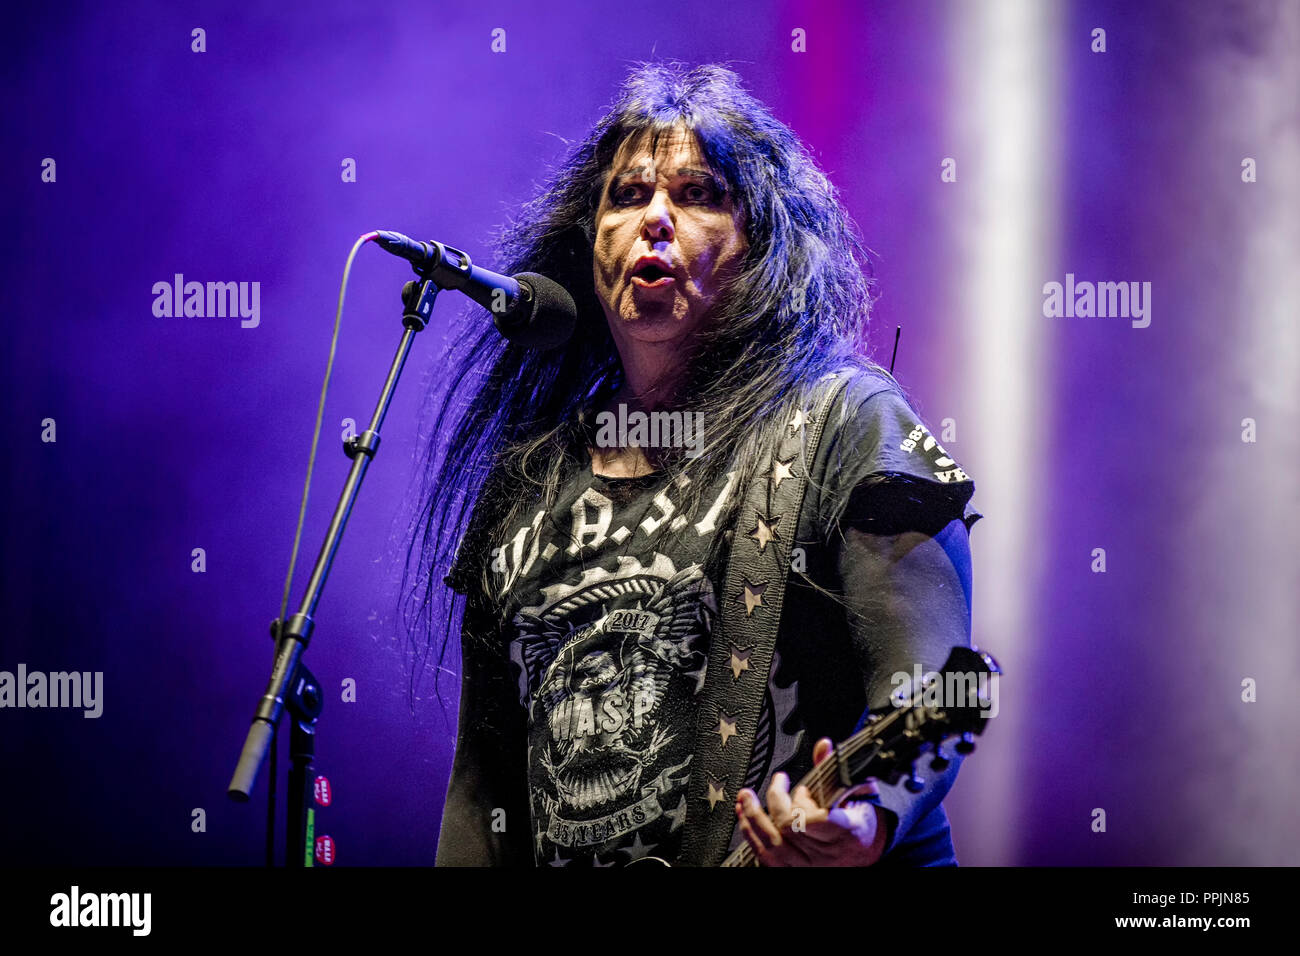 Norway, Halden - June 21, 2018. The American glam metal band W.A.S.P. performs a live concert during the Norwegian music metal festival Tons of Rock 2018 in Halden. Here the band’s last remaining original band member, vocalist singer and songwriter, Blackie Lawless is seen live on stage. (Photo credit: Gonzales Photo - Terje Dokken). Stock Photo